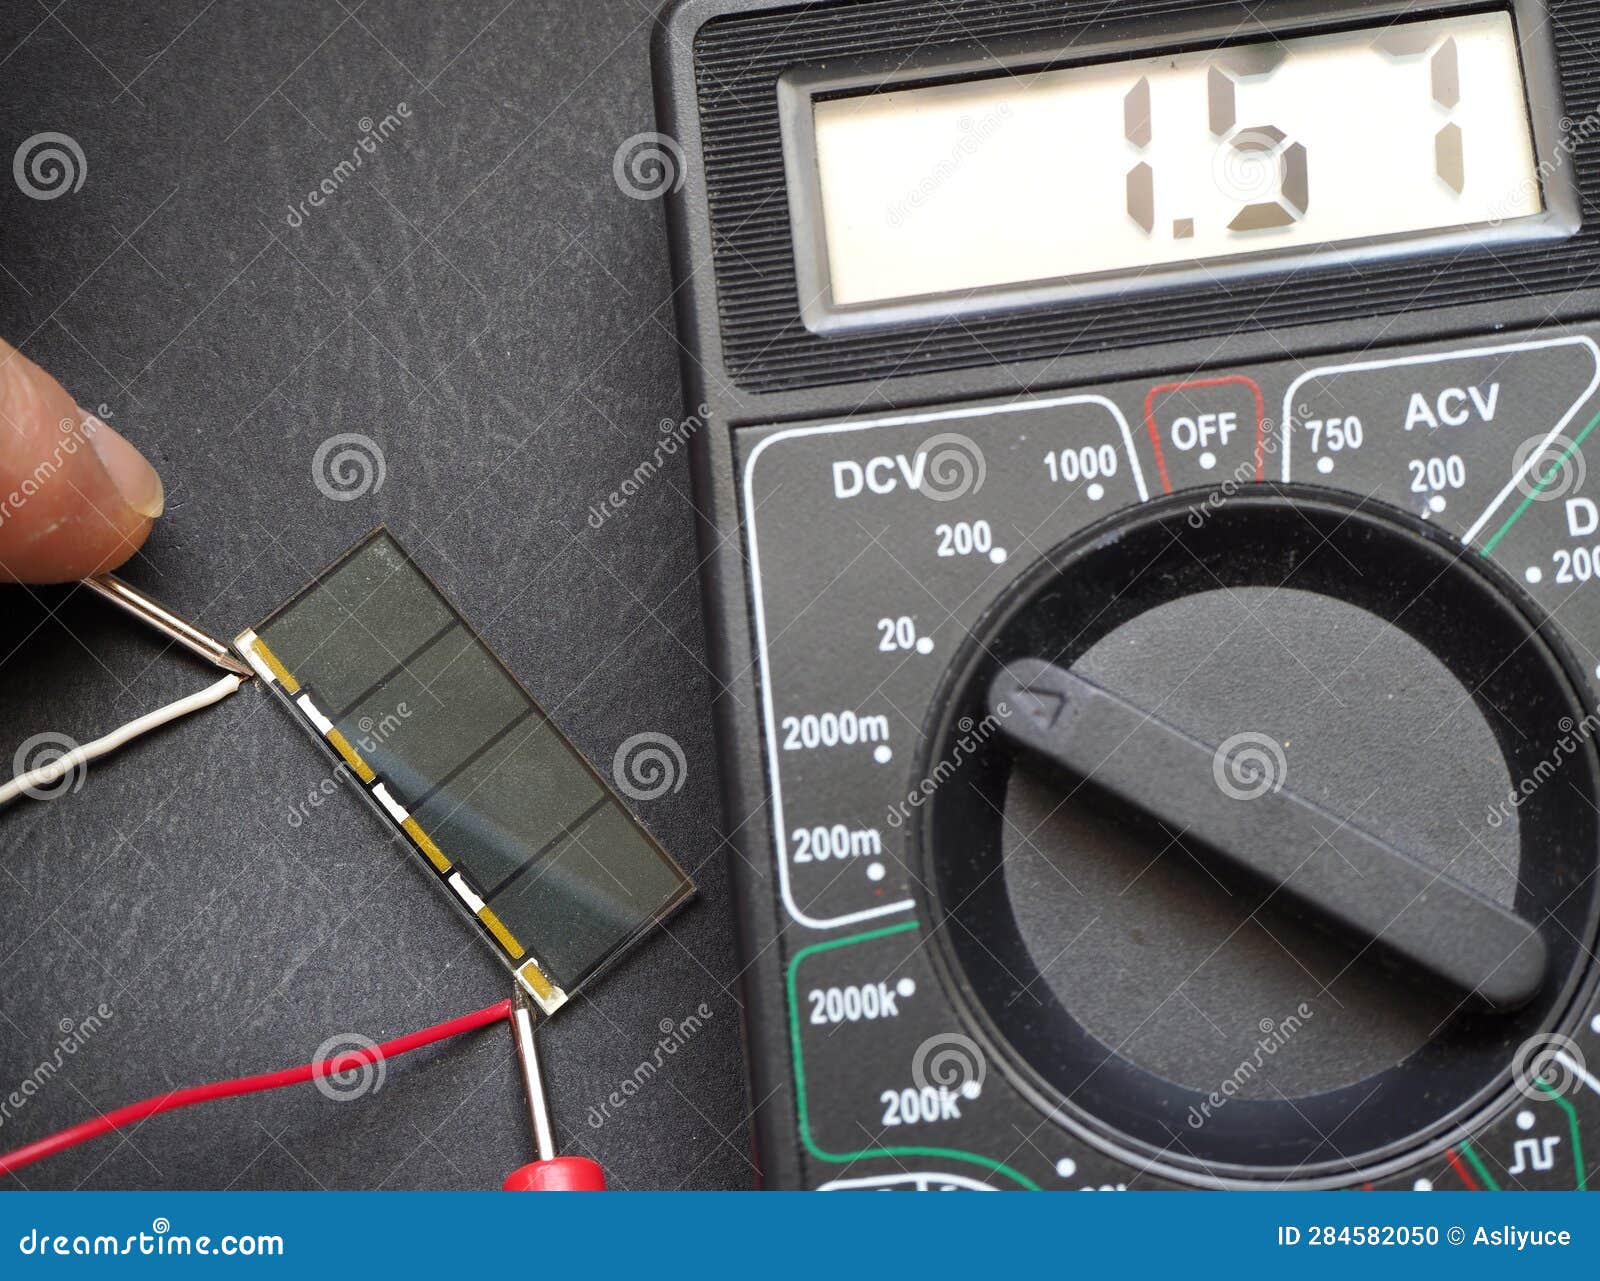 photoelectric cell test